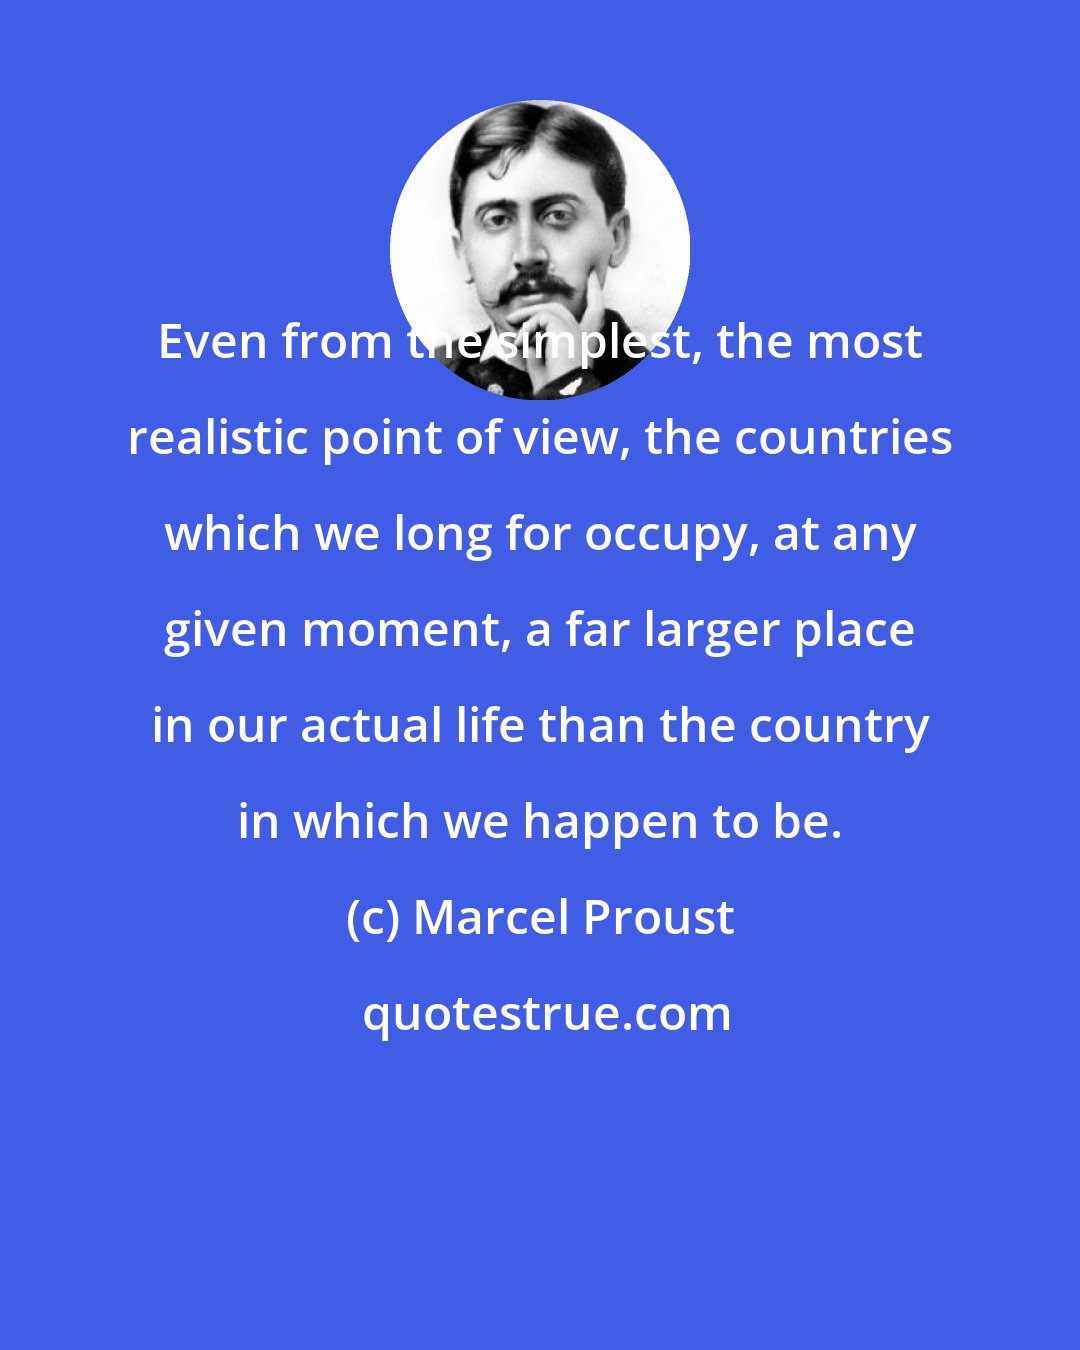 Marcel Proust: Even from the simplest, the most realistic point of view, the countries which we long for occupy, at any given moment, a far larger place in our actual life than the country in which we happen to be.